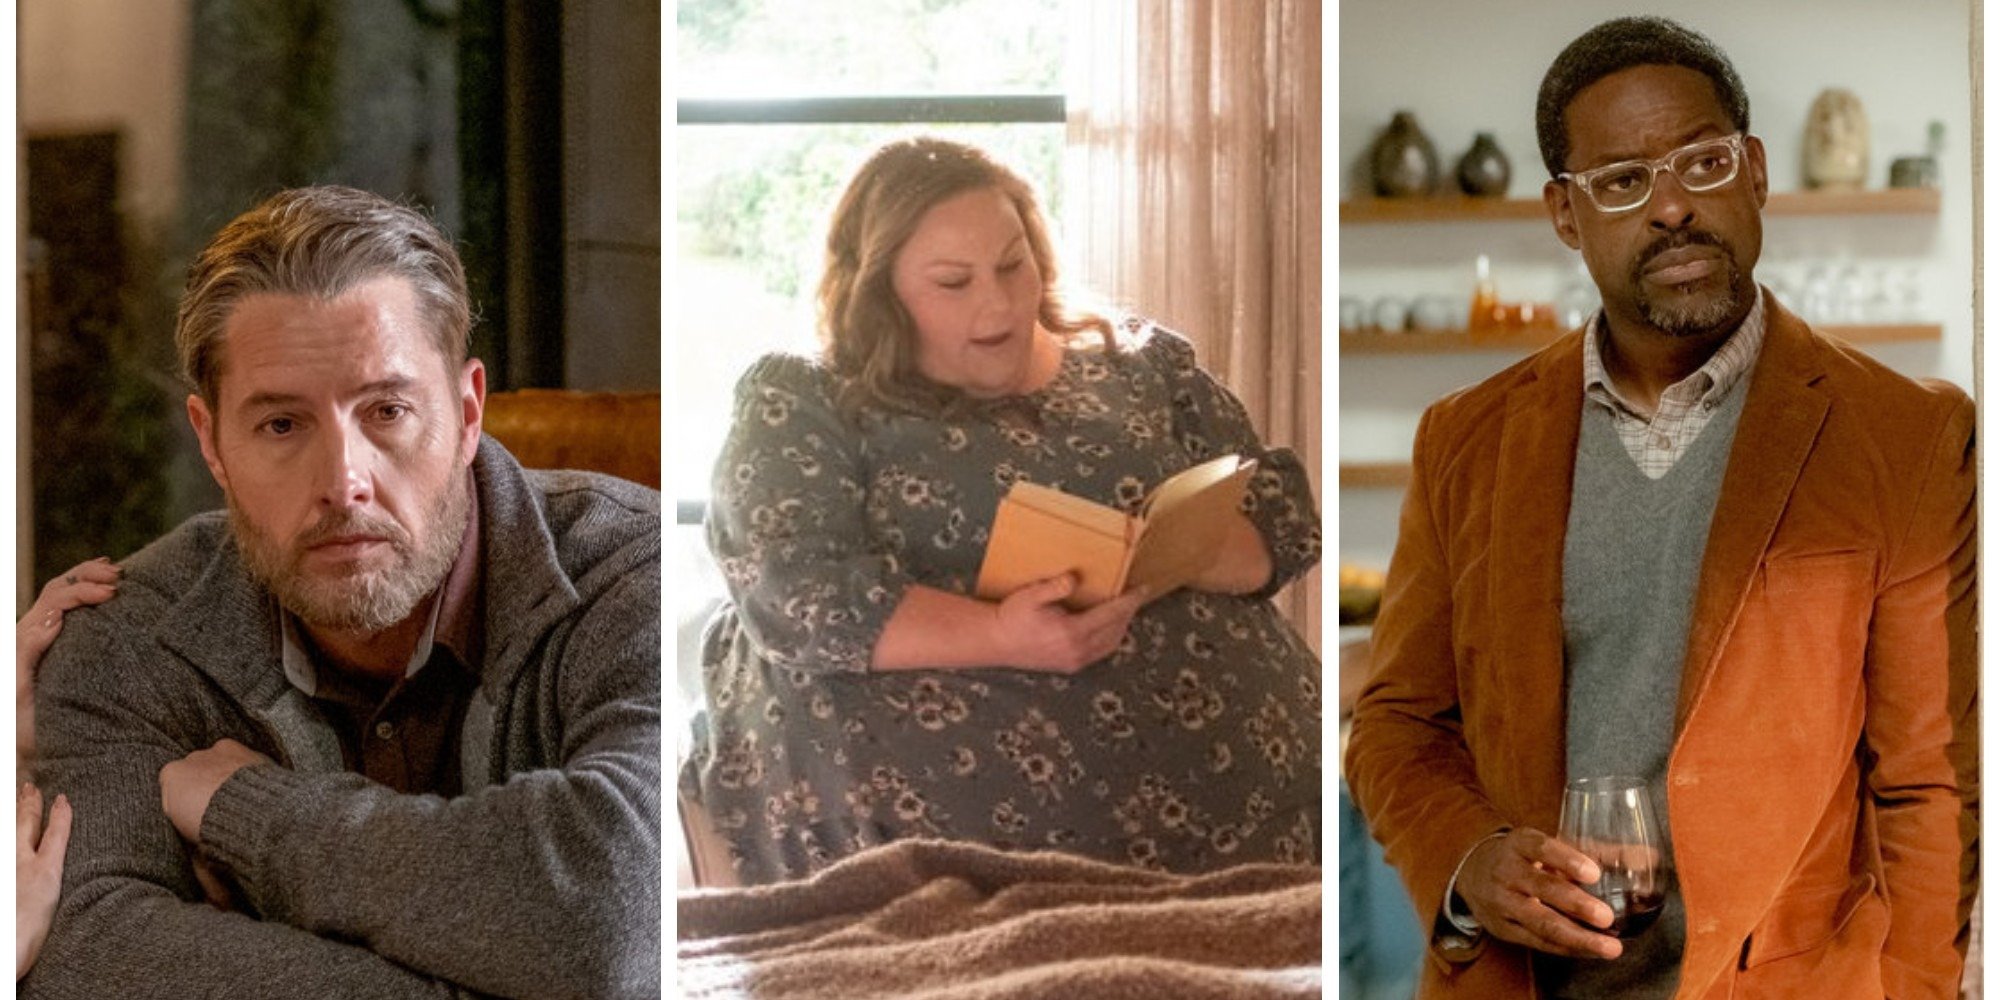 Justin Hartley, Chrissy Metz, and Sterling K. Brown star on This Is Us.